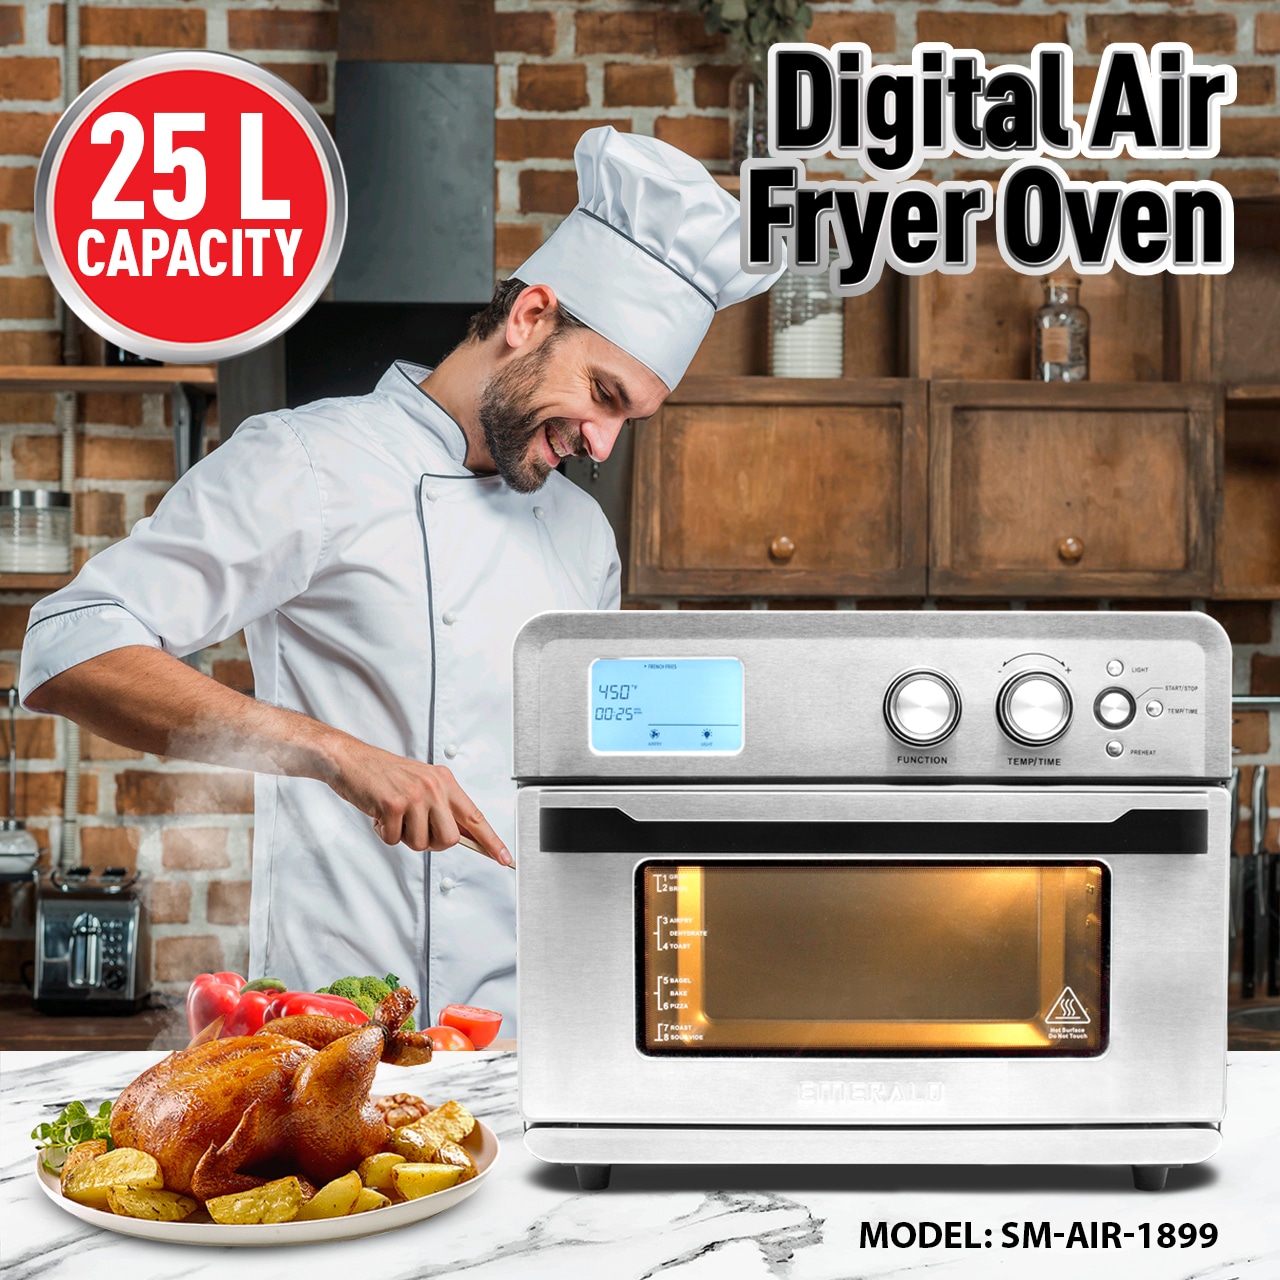 Emerald 26 Quart Silver 1800W Digital Air Fryer, Countertop Oven, Roast,  Bake, Broil, Reheat, Fry Oil-Free 3 Tray Accessories With Large Visible  Window (SM-AIR-1899) 